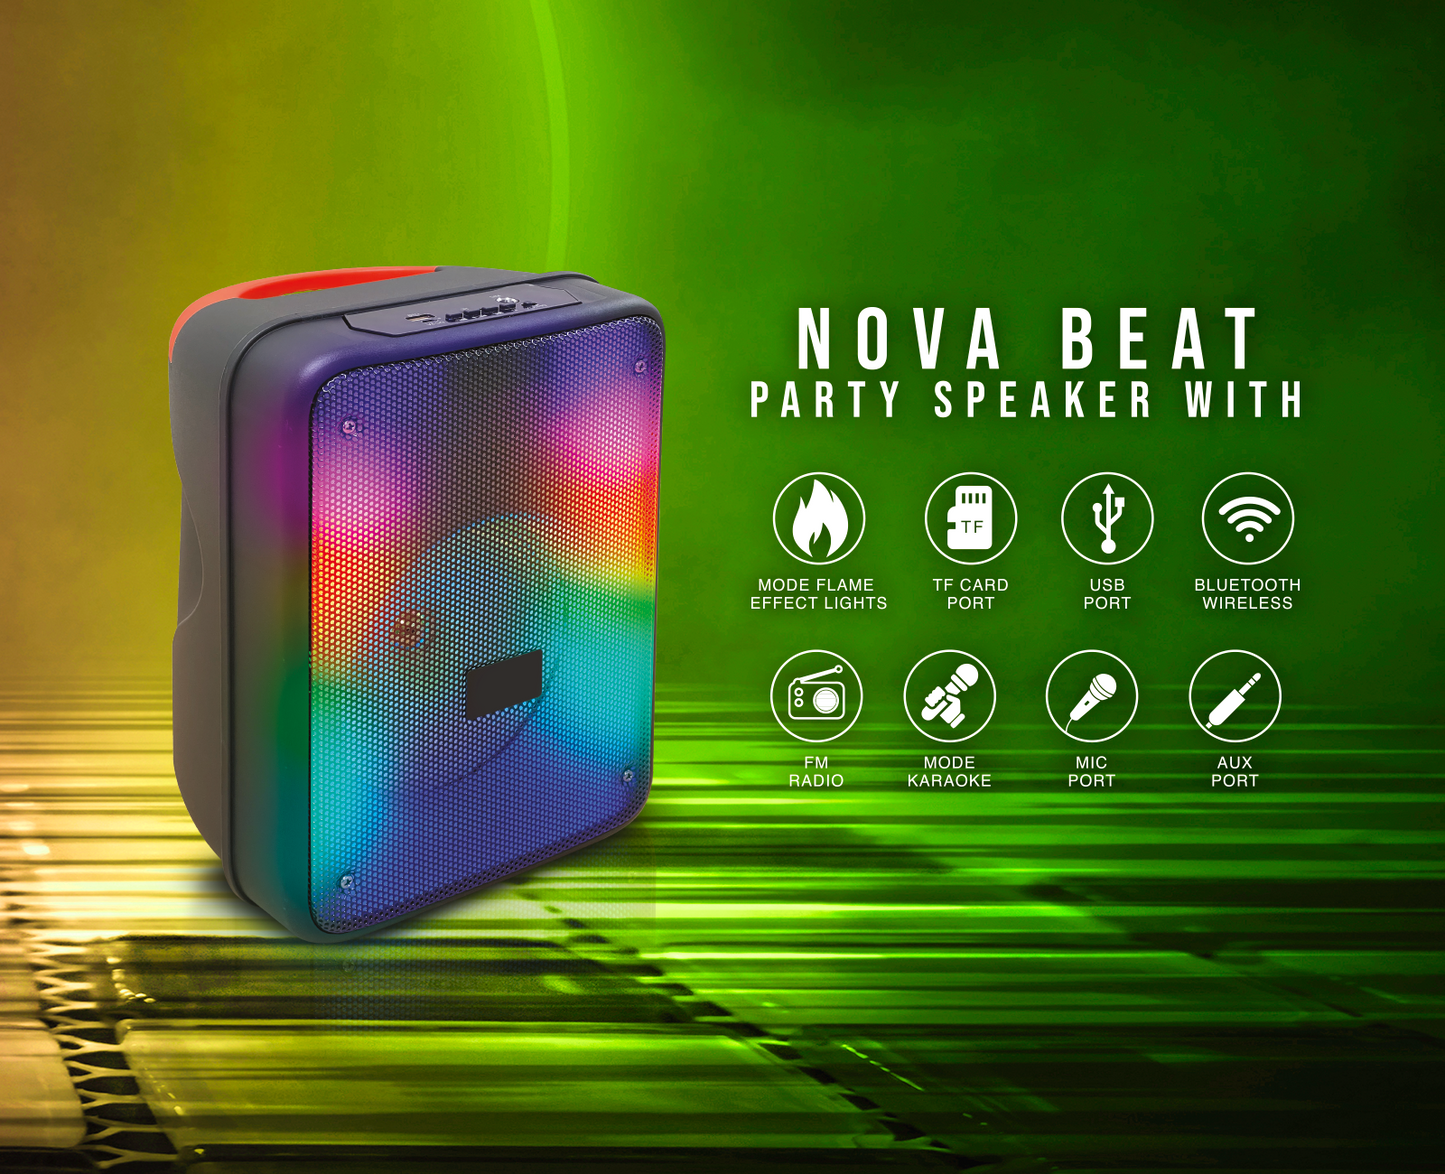 TOPTECH KL-7 NOVA BEAT, 6.5 Inch Woofer Rechargeable Party Portable Speaker with Flame Effects Lights on Grill,10 meters (33ft)Bluetooth Distance,of Blazing Powerful Sound, Handle and Wheels for Party/Gift/Indooer/Outdoor